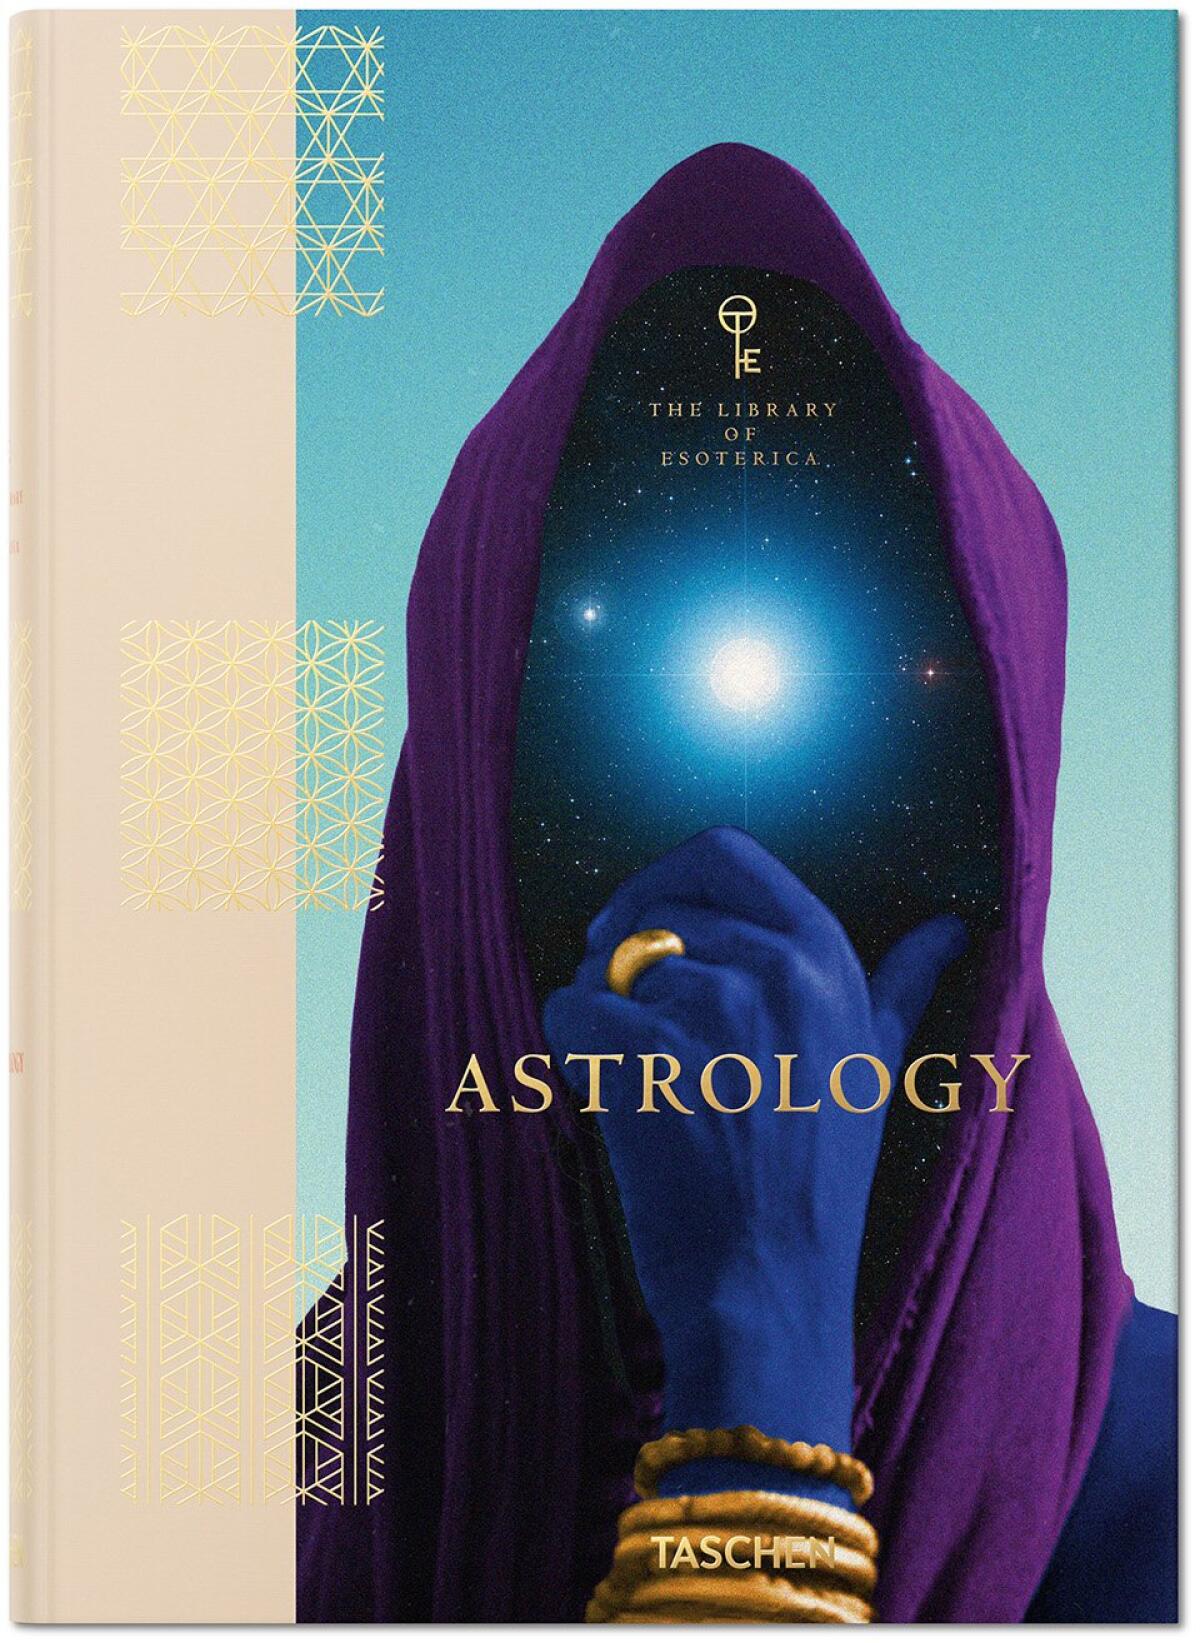 “Astrology. The Library of Esoterica”, $40.